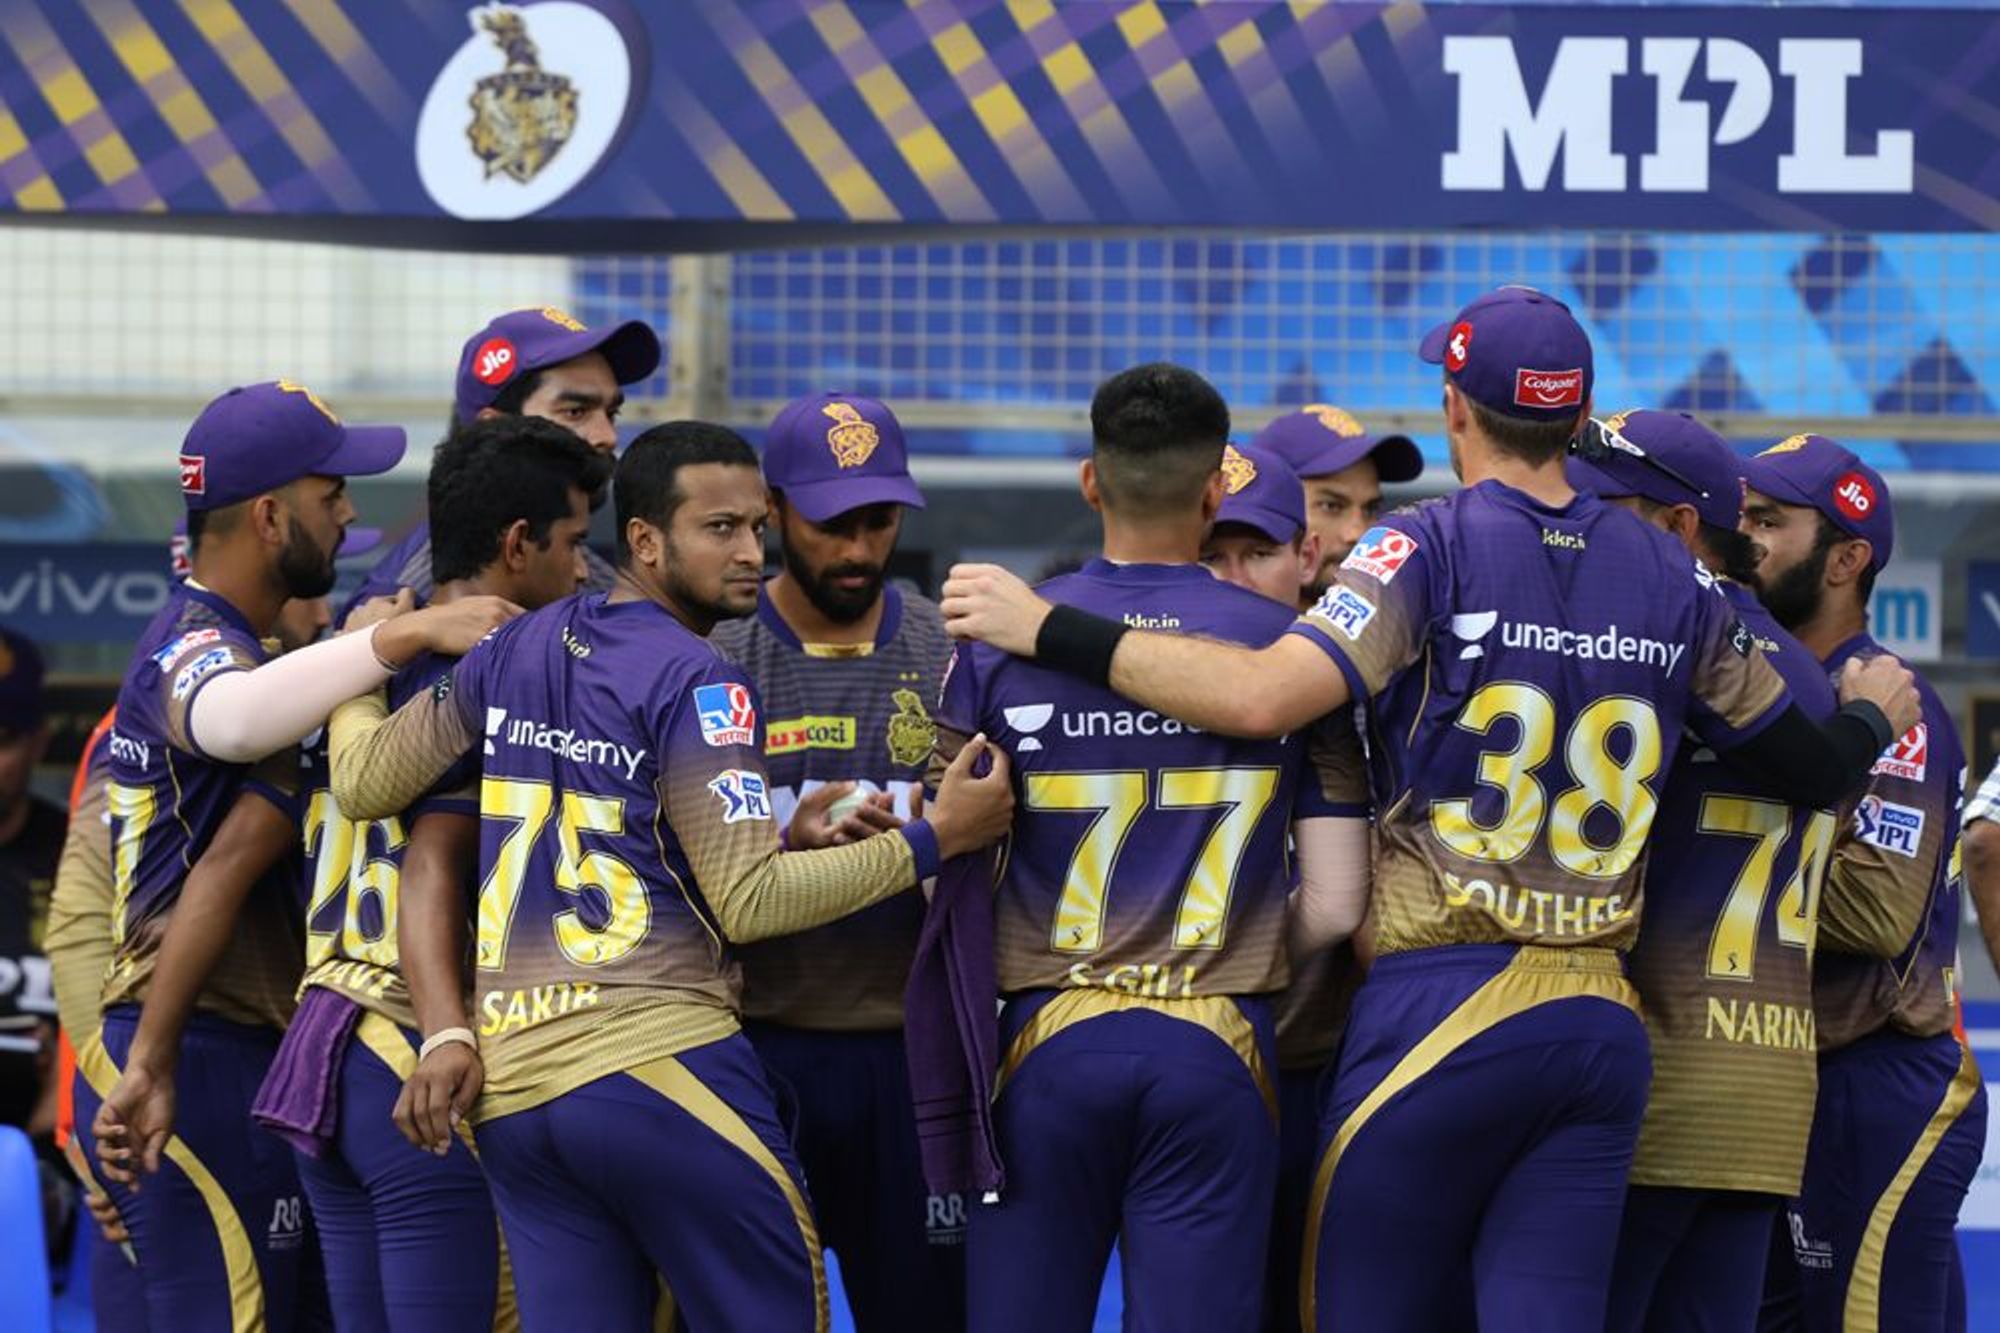 KKR restricted SRH to 115/8 in their 20 overs